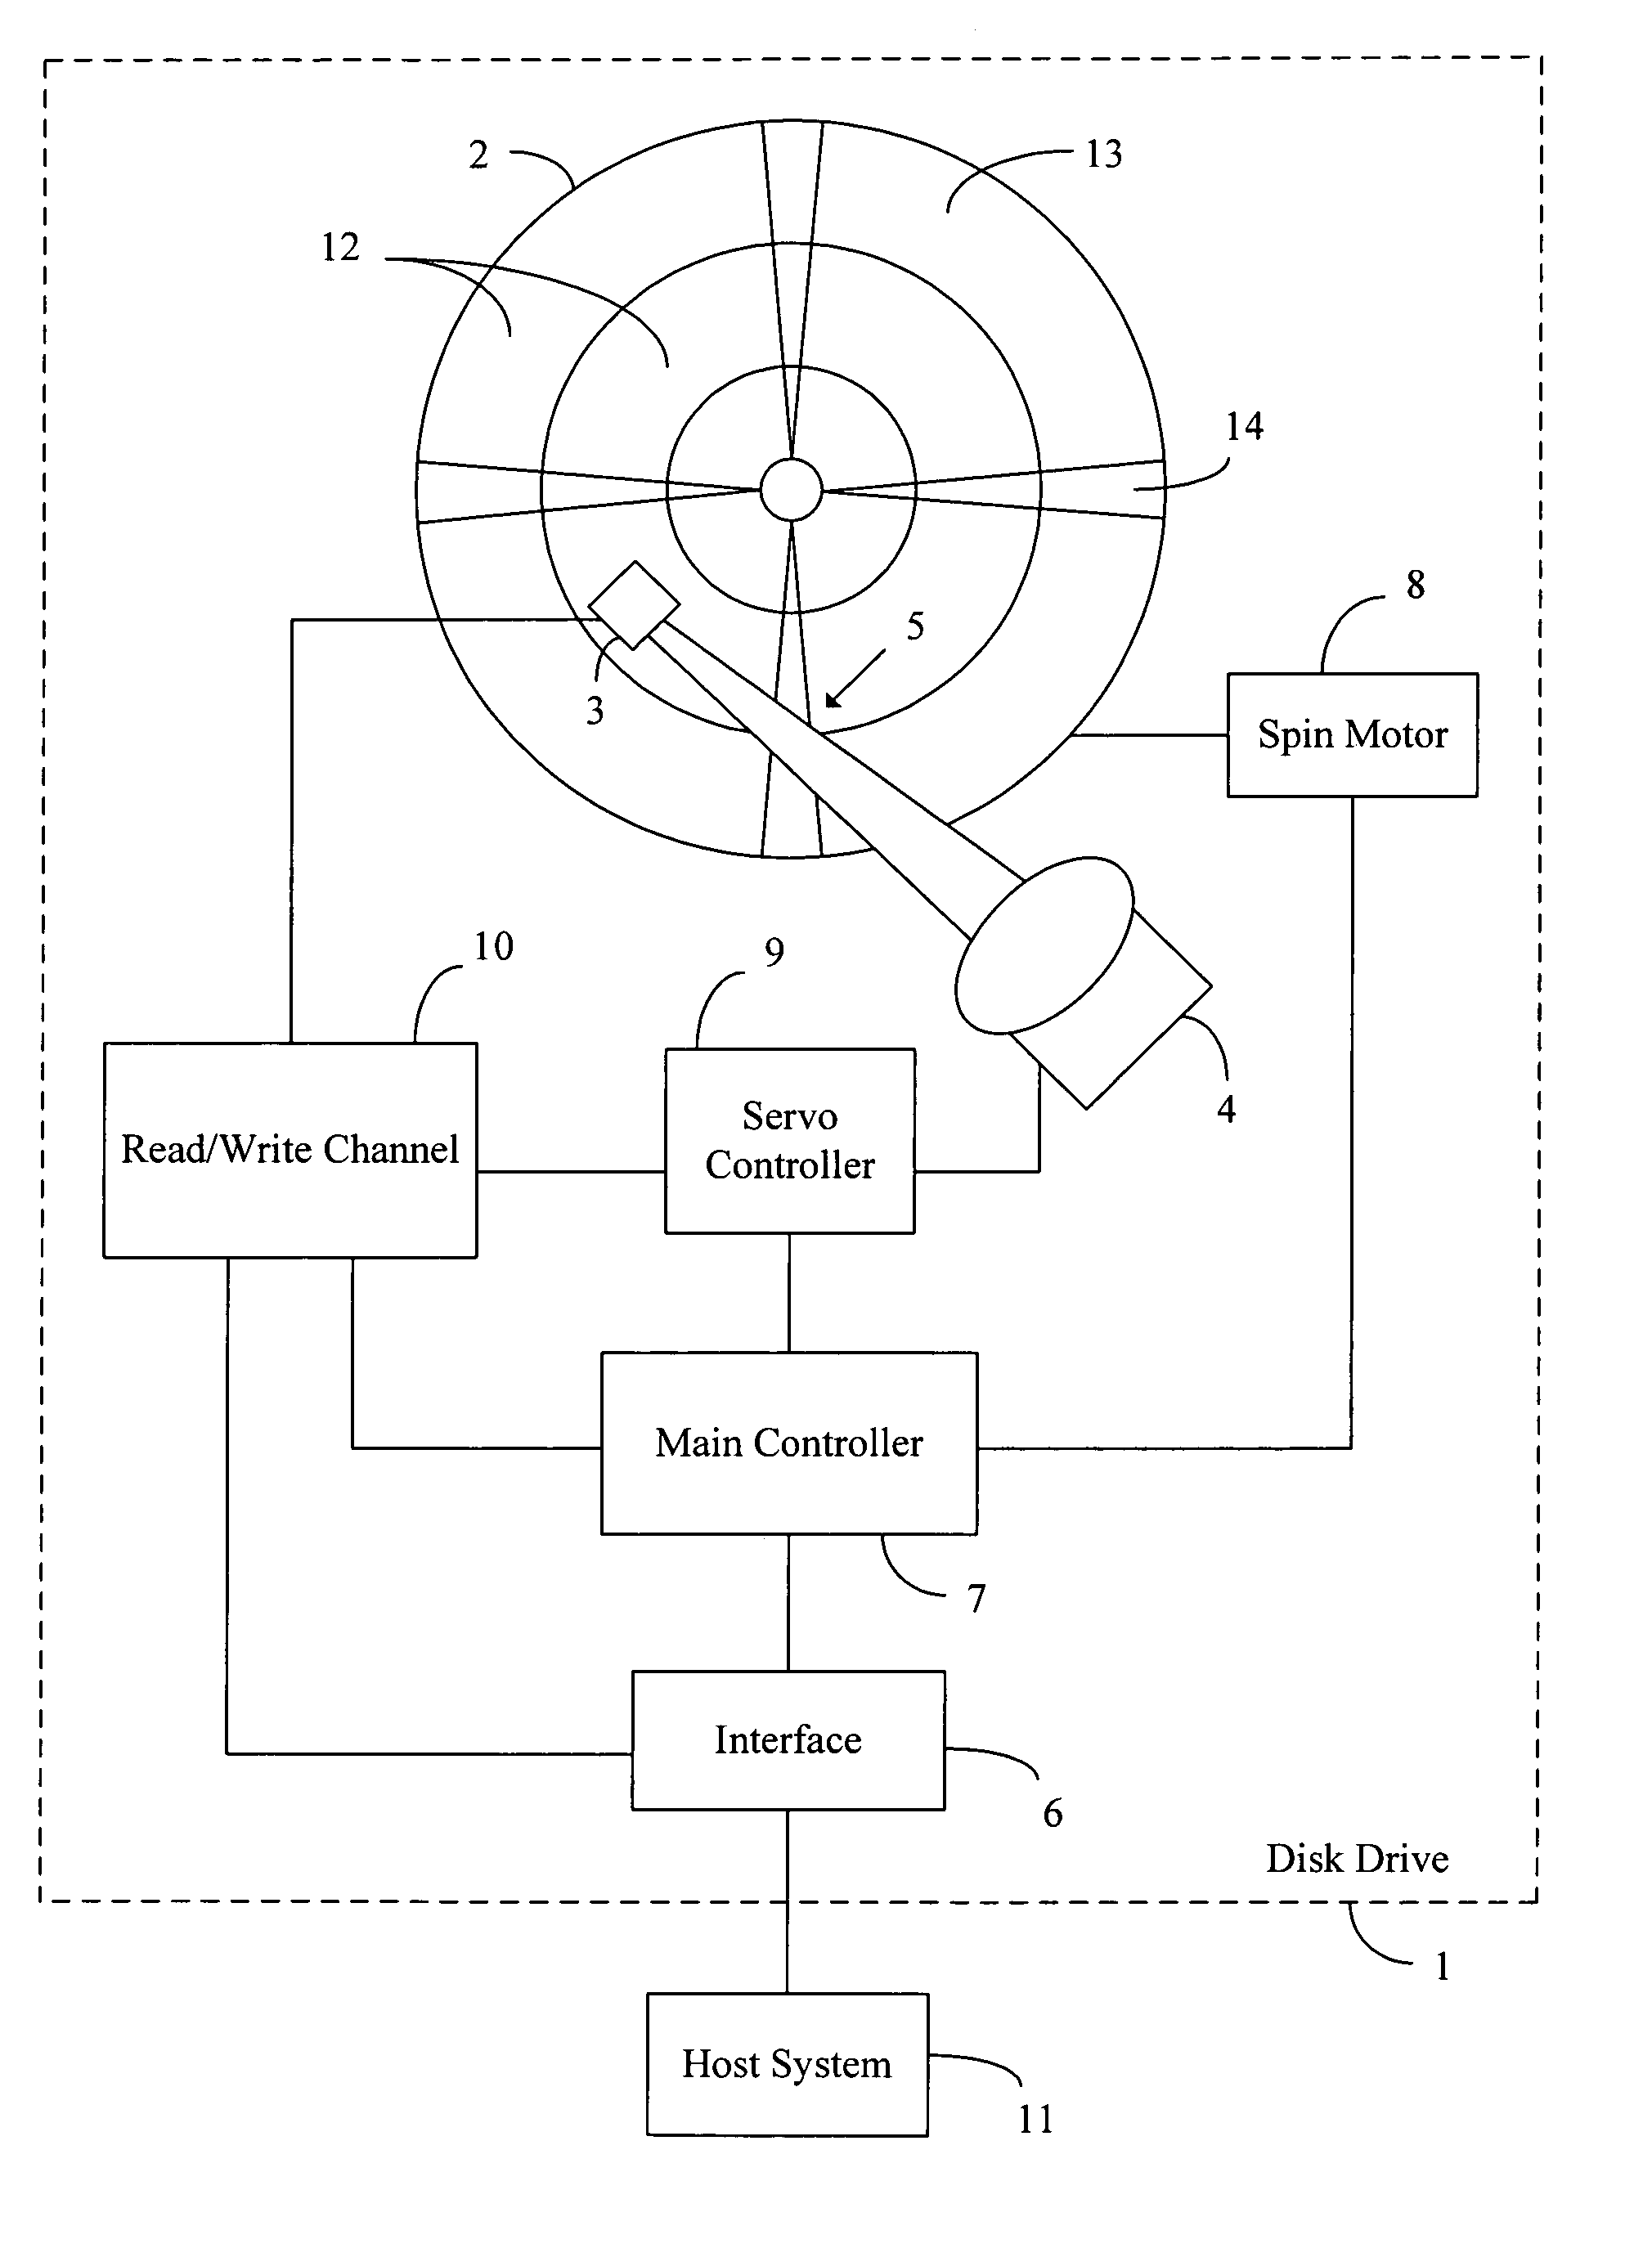 Disk drives and methods allowing for super silent seeks